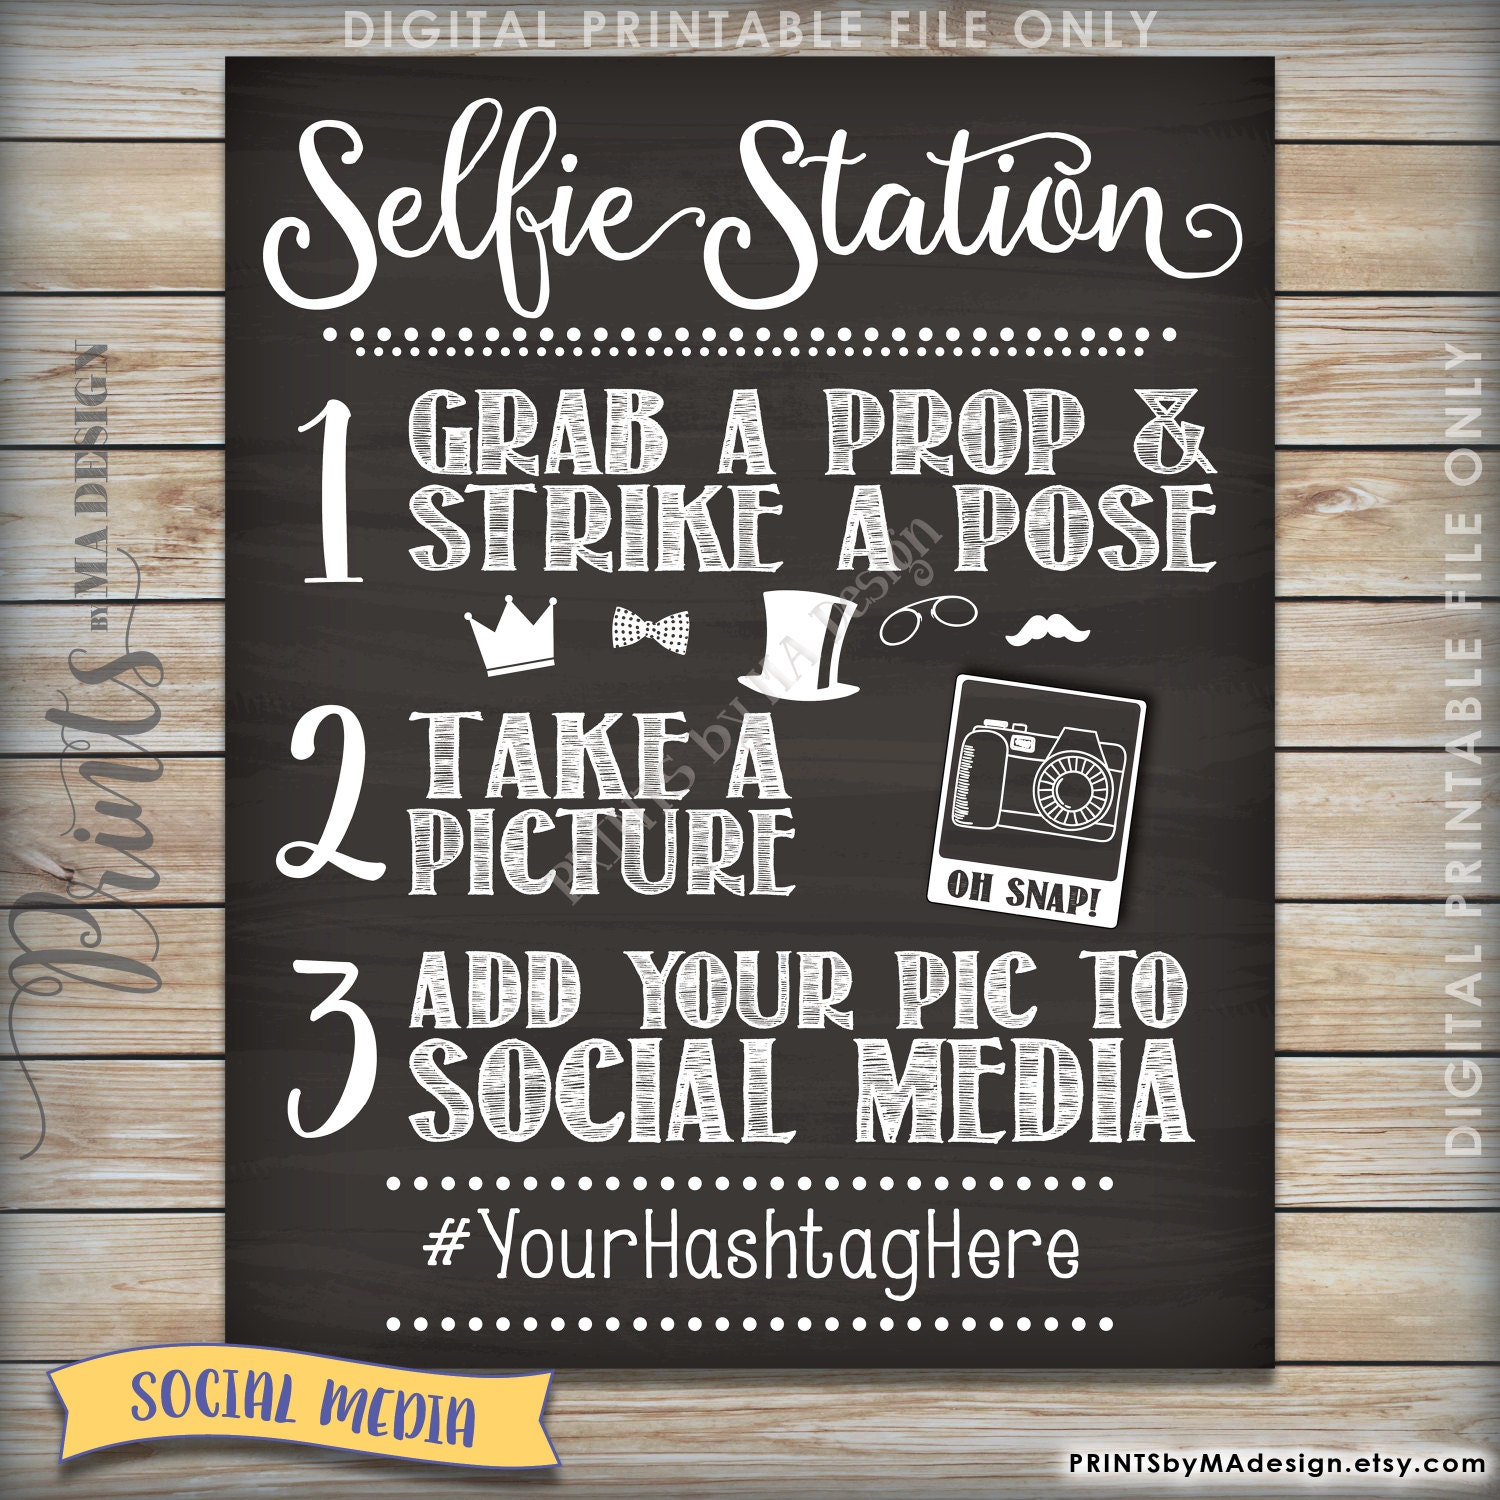 selfie-station-sign-add-photo-to-social-media-hashtag-facebook